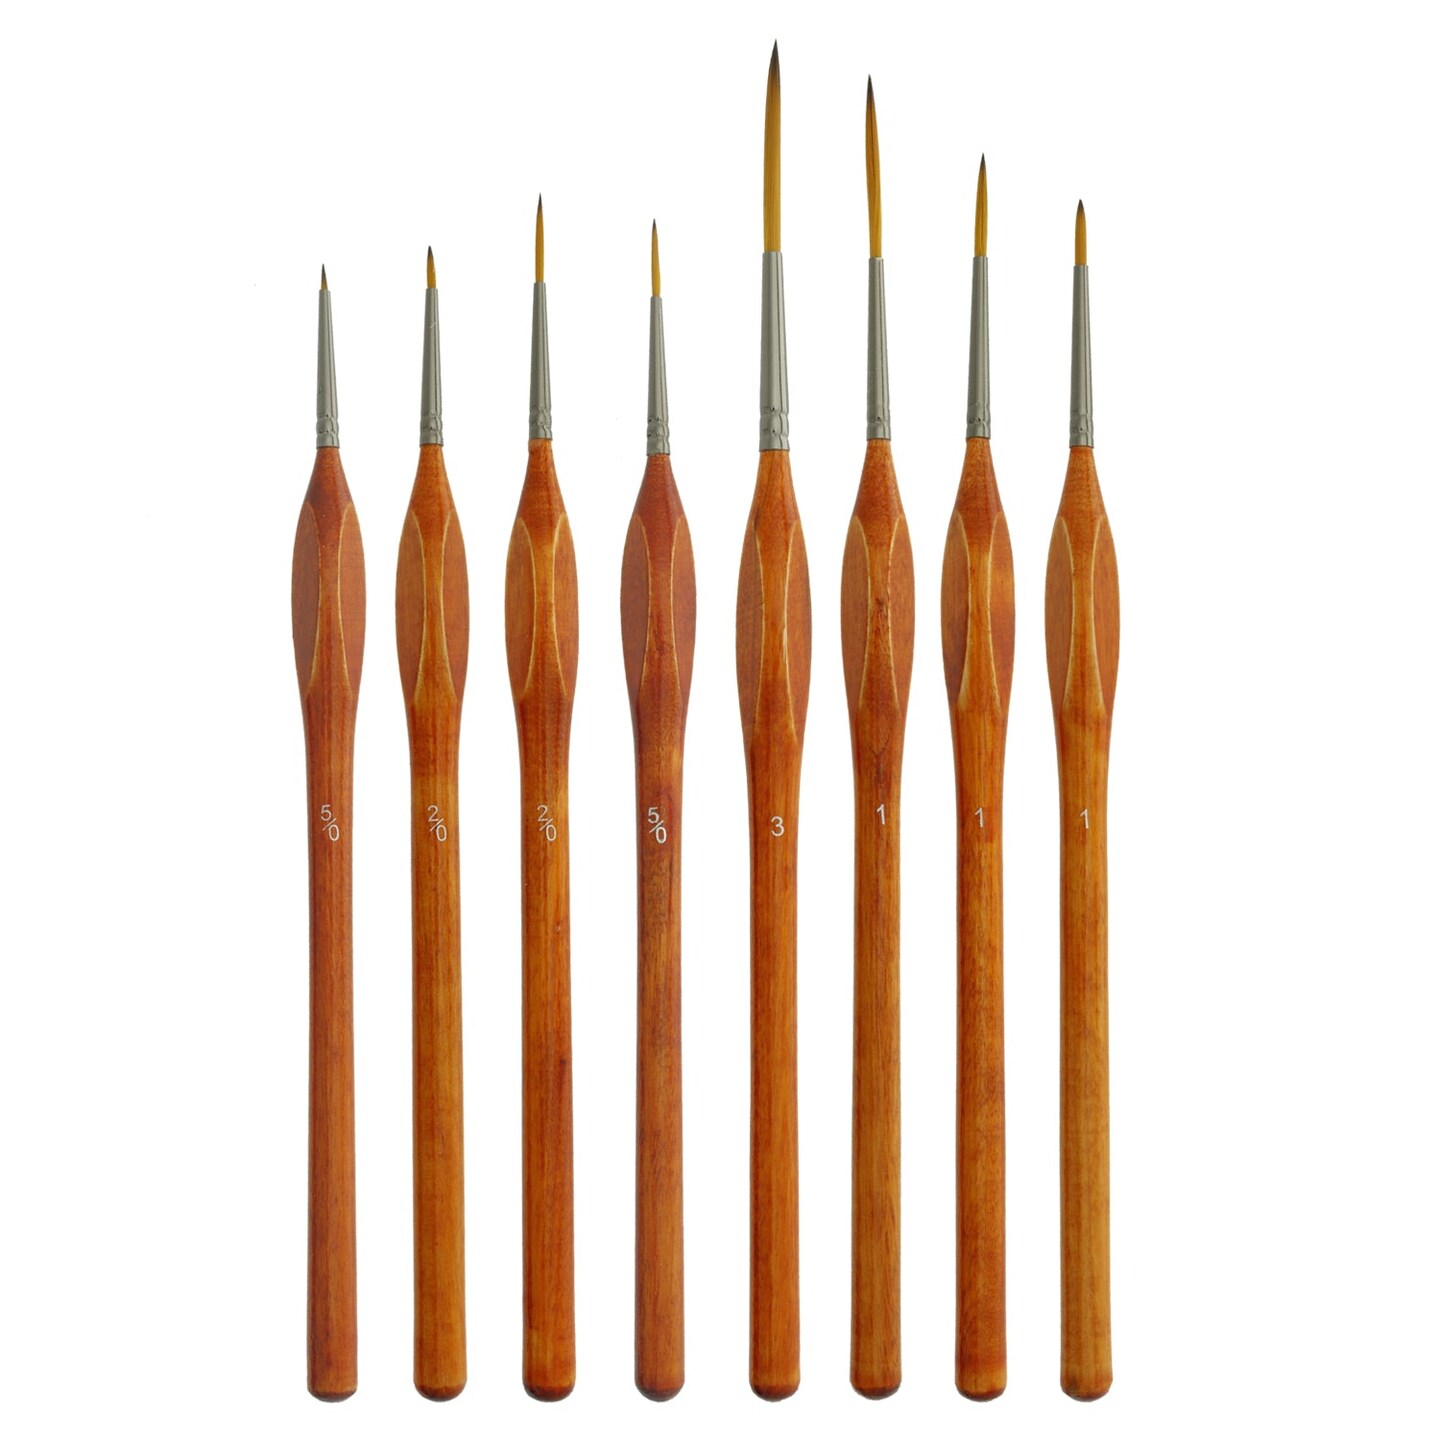 8 Piece Taklon Detail and Liner Artist Brush Set with Wood Comfort Grip Handles - Art, Detailing, Acrylic, Oil, Watercolor